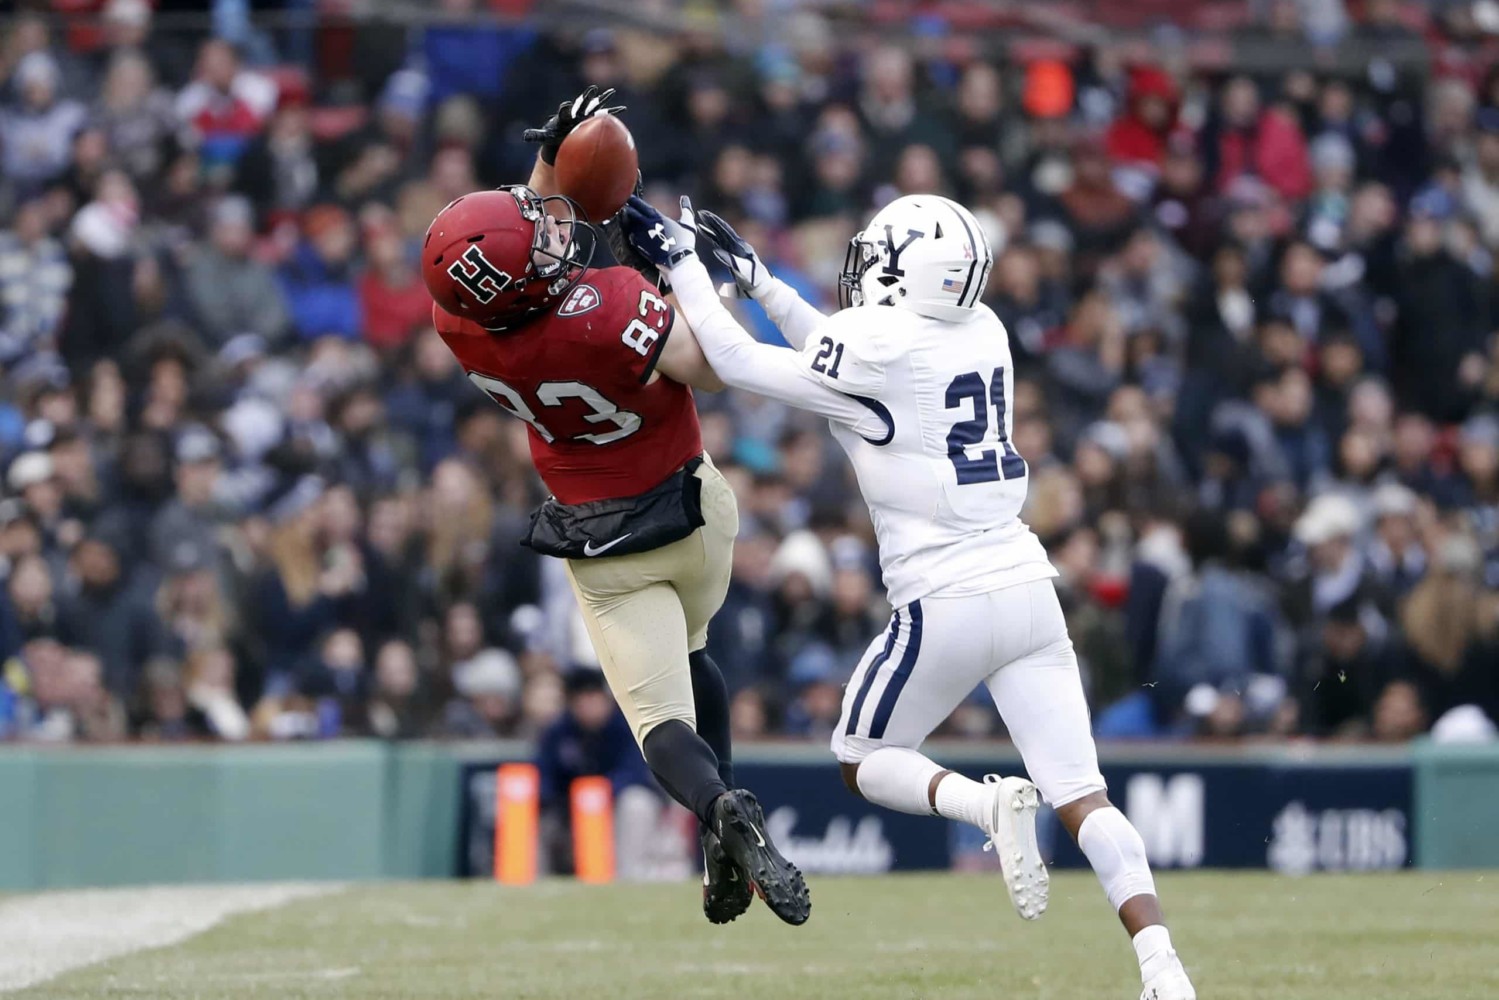 Harvard receiver makes contested catch against Yale in rivalry match